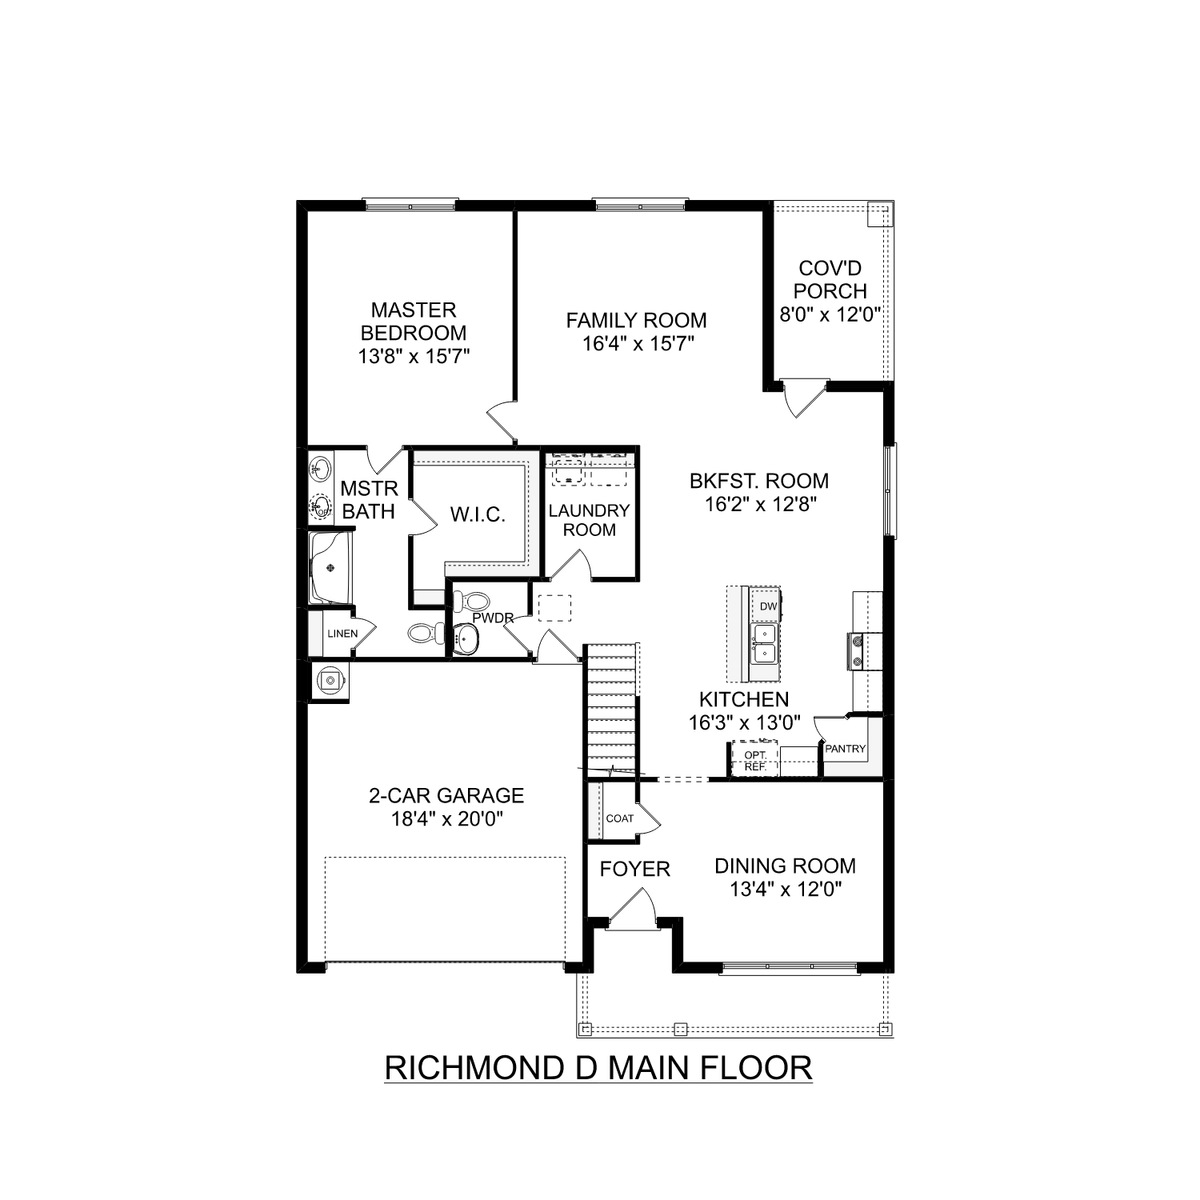 1 - The Richmond D buildable floor plan layout in Davidson Homes' Creek Grove community.